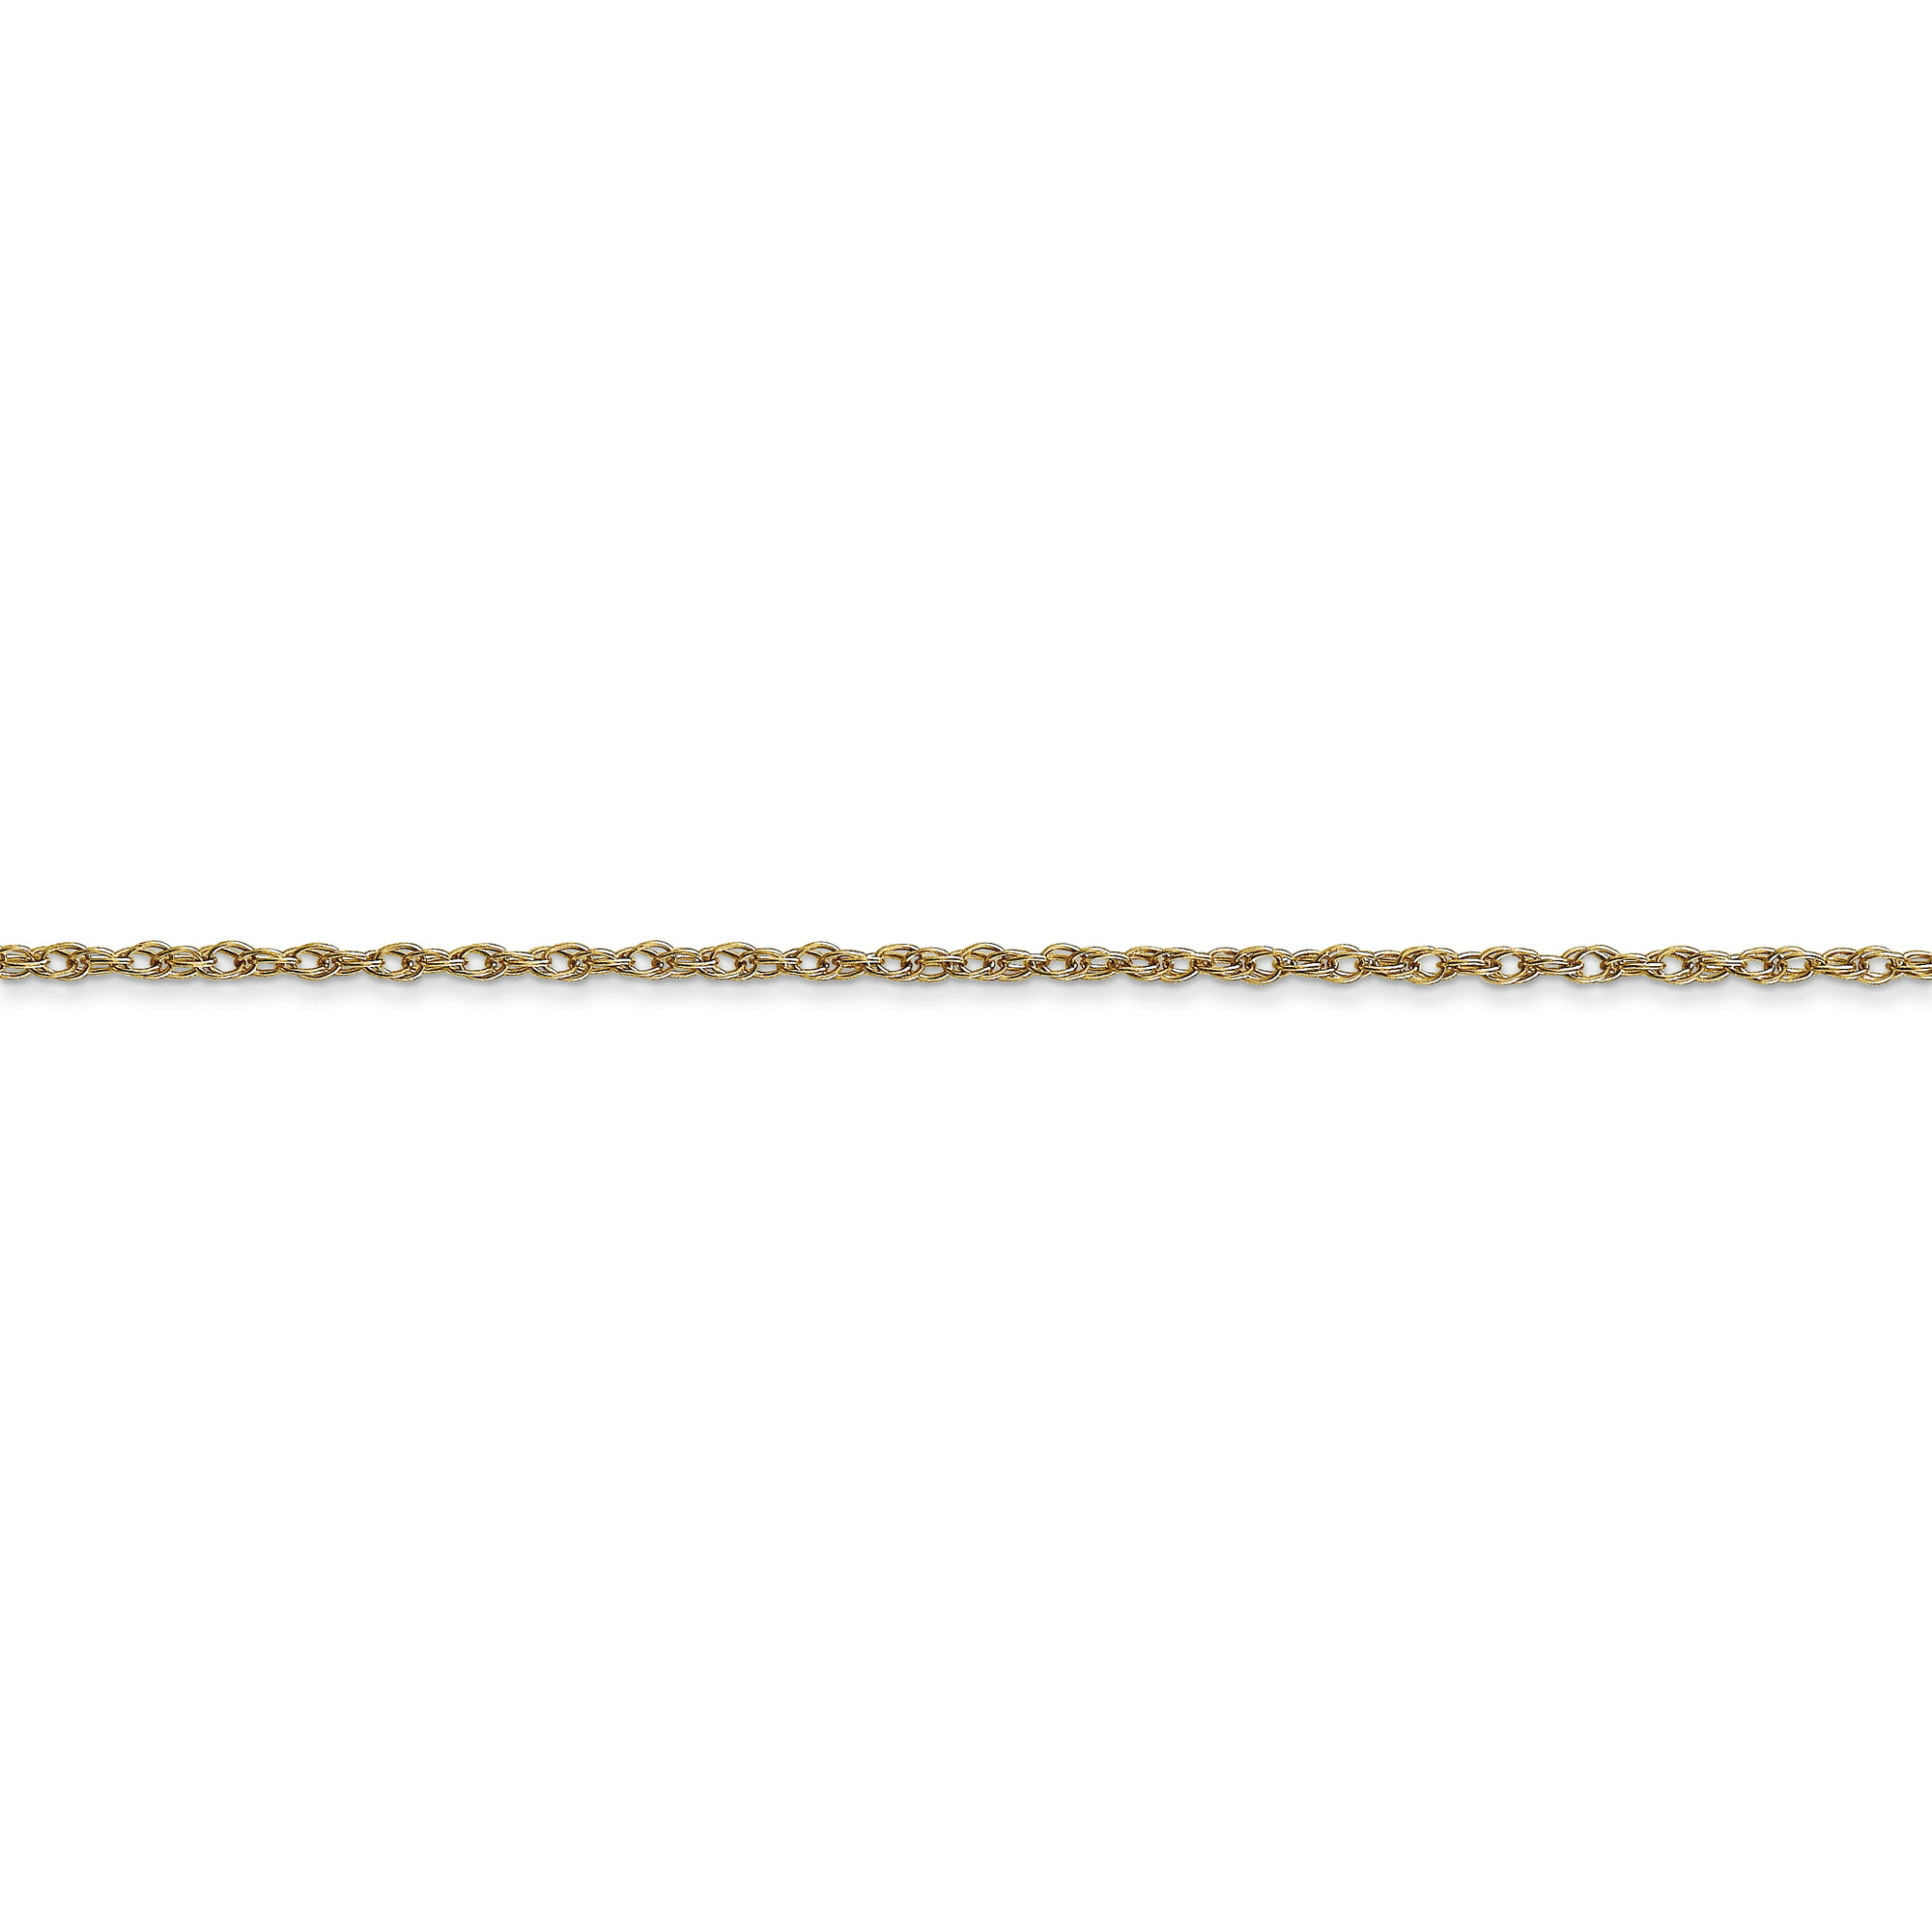 14k Yellow Gold 1.15mm Cable Link Rope Chain Necklace 16 Inch Pendant Charm Carded Fine Jewelry For Women Gifts For Her 